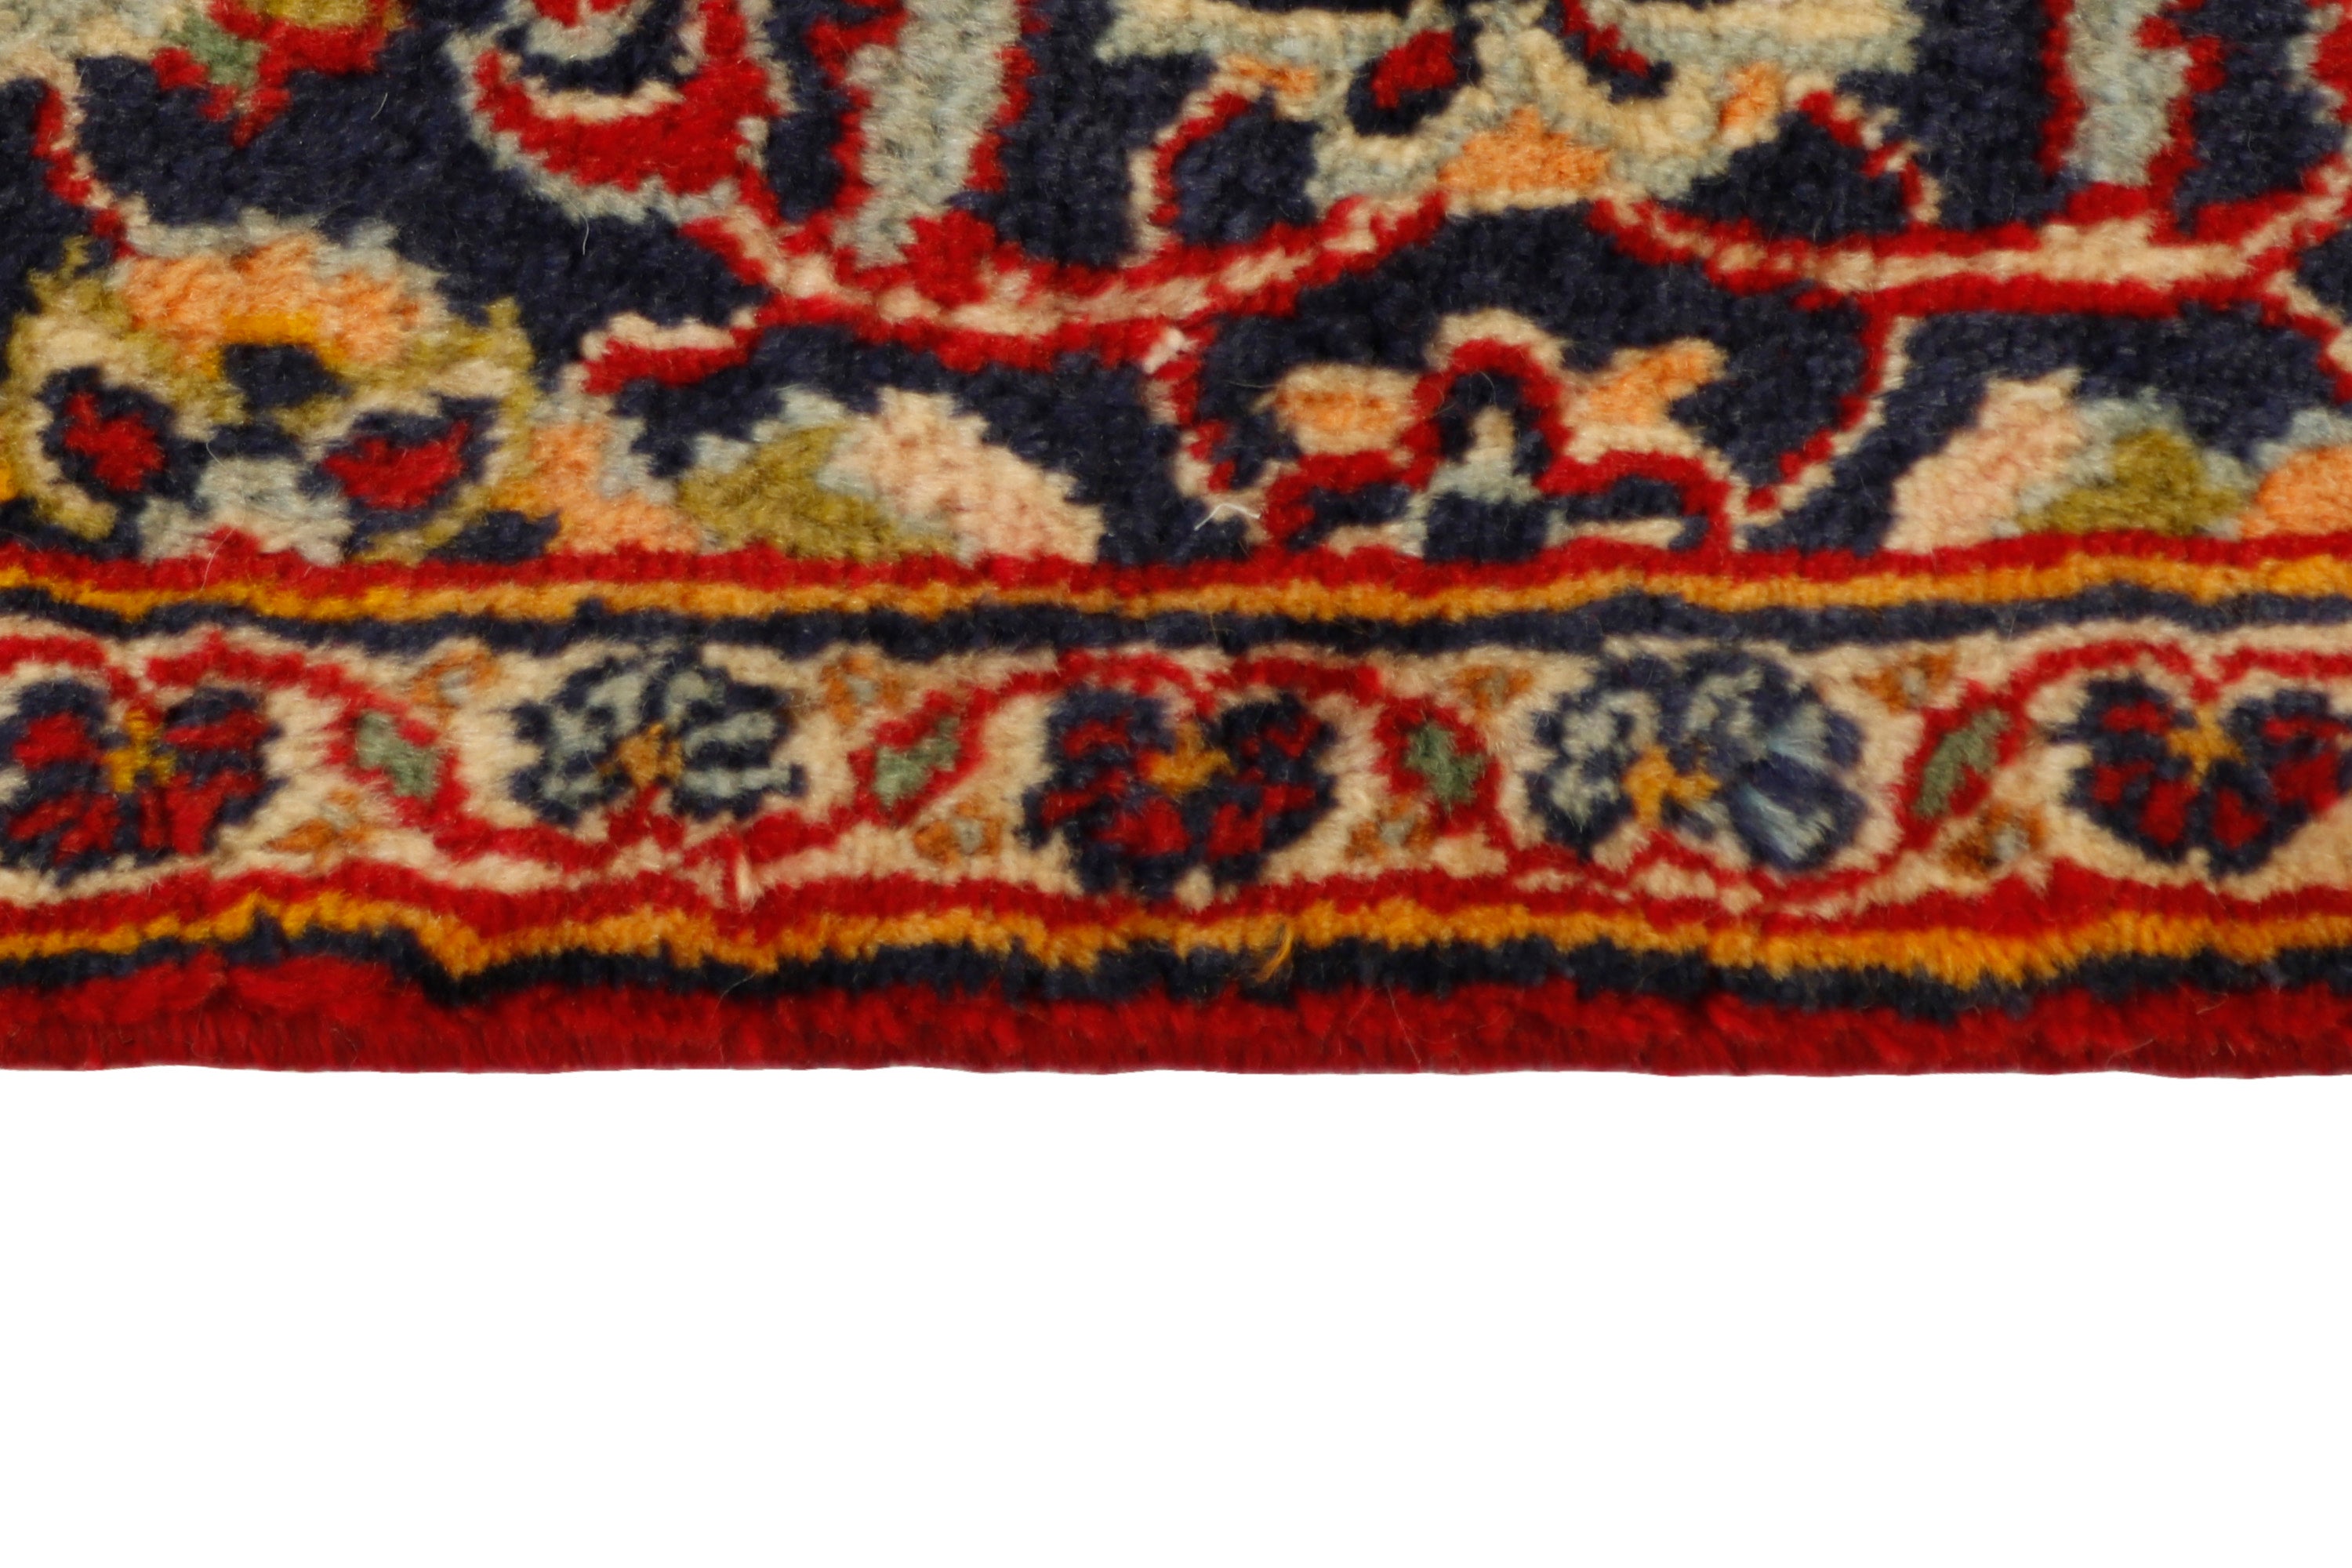 Authentic persian rug with traditional floral design in red